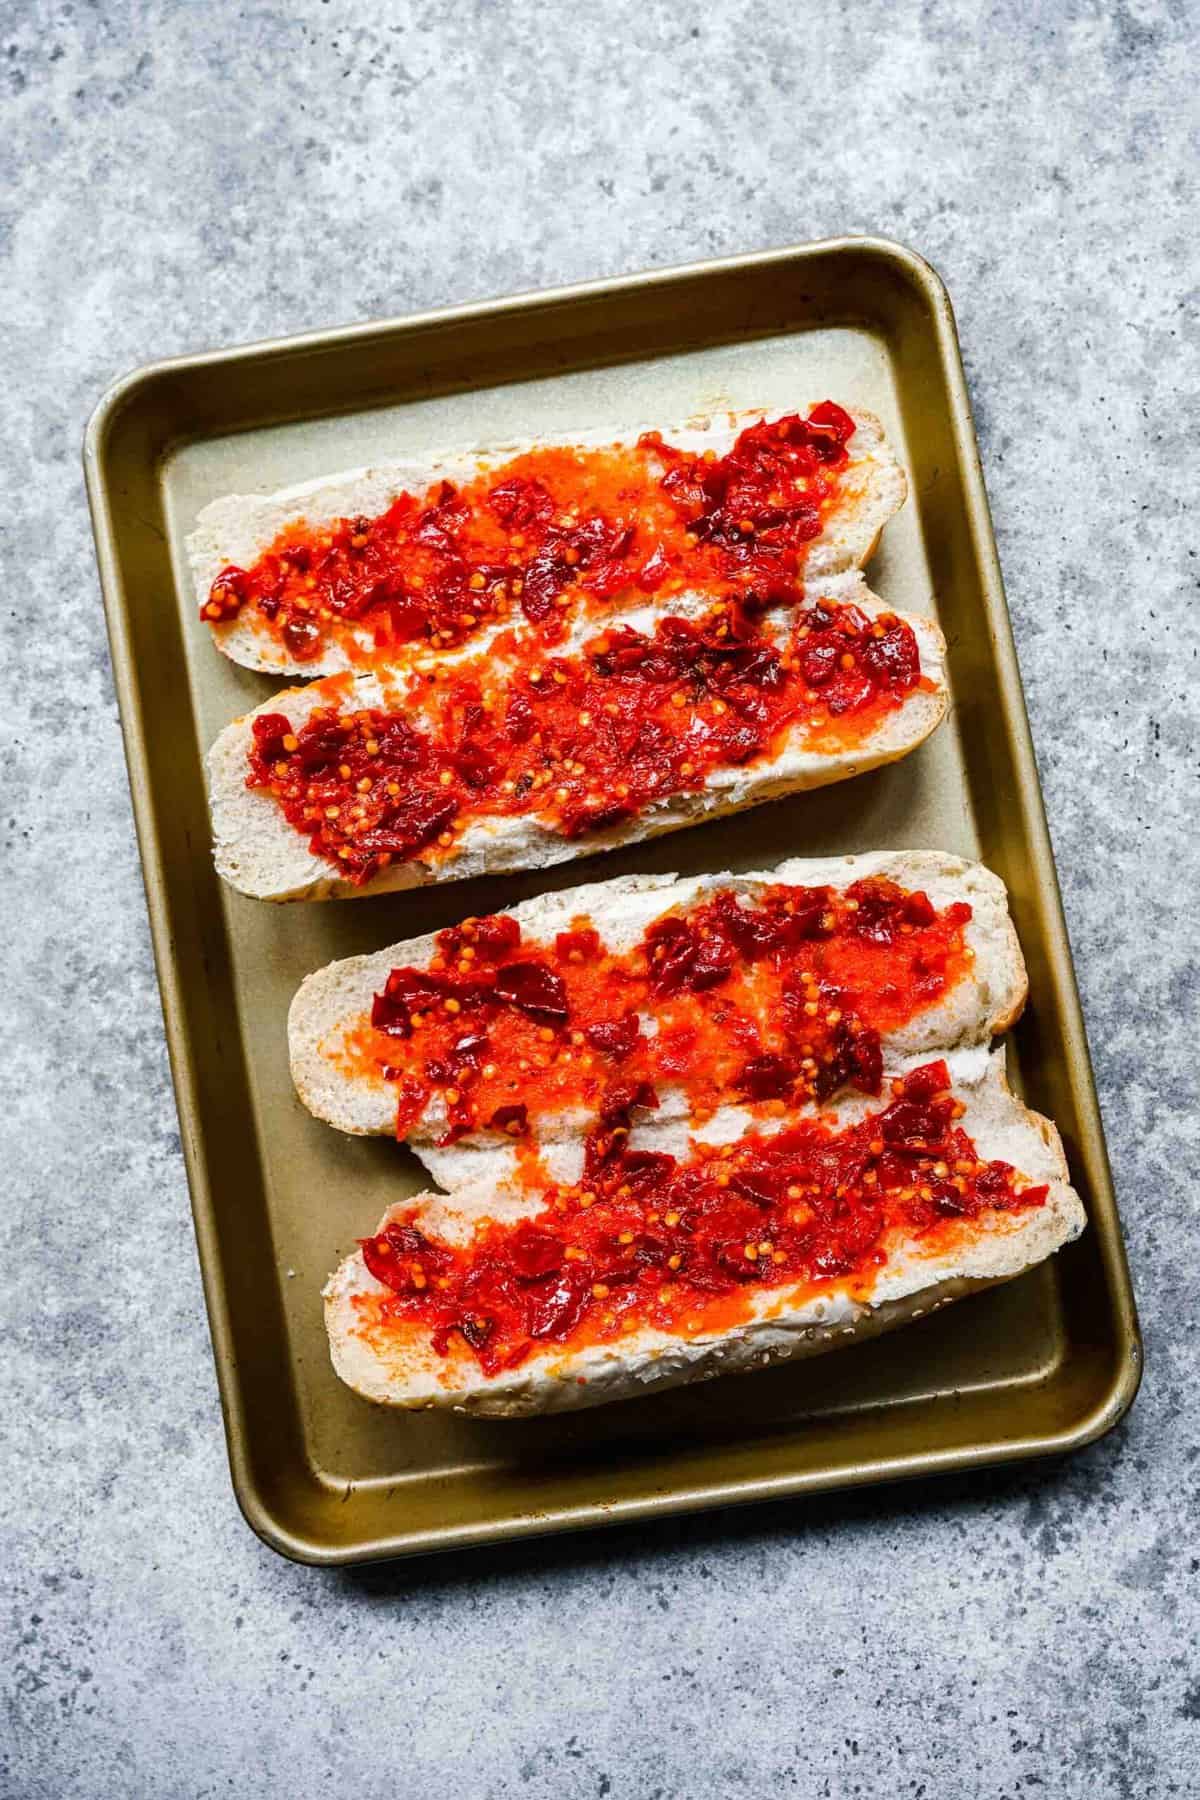 Two hoagie loaves on a baking sheet, covered in Calabrian chili paste